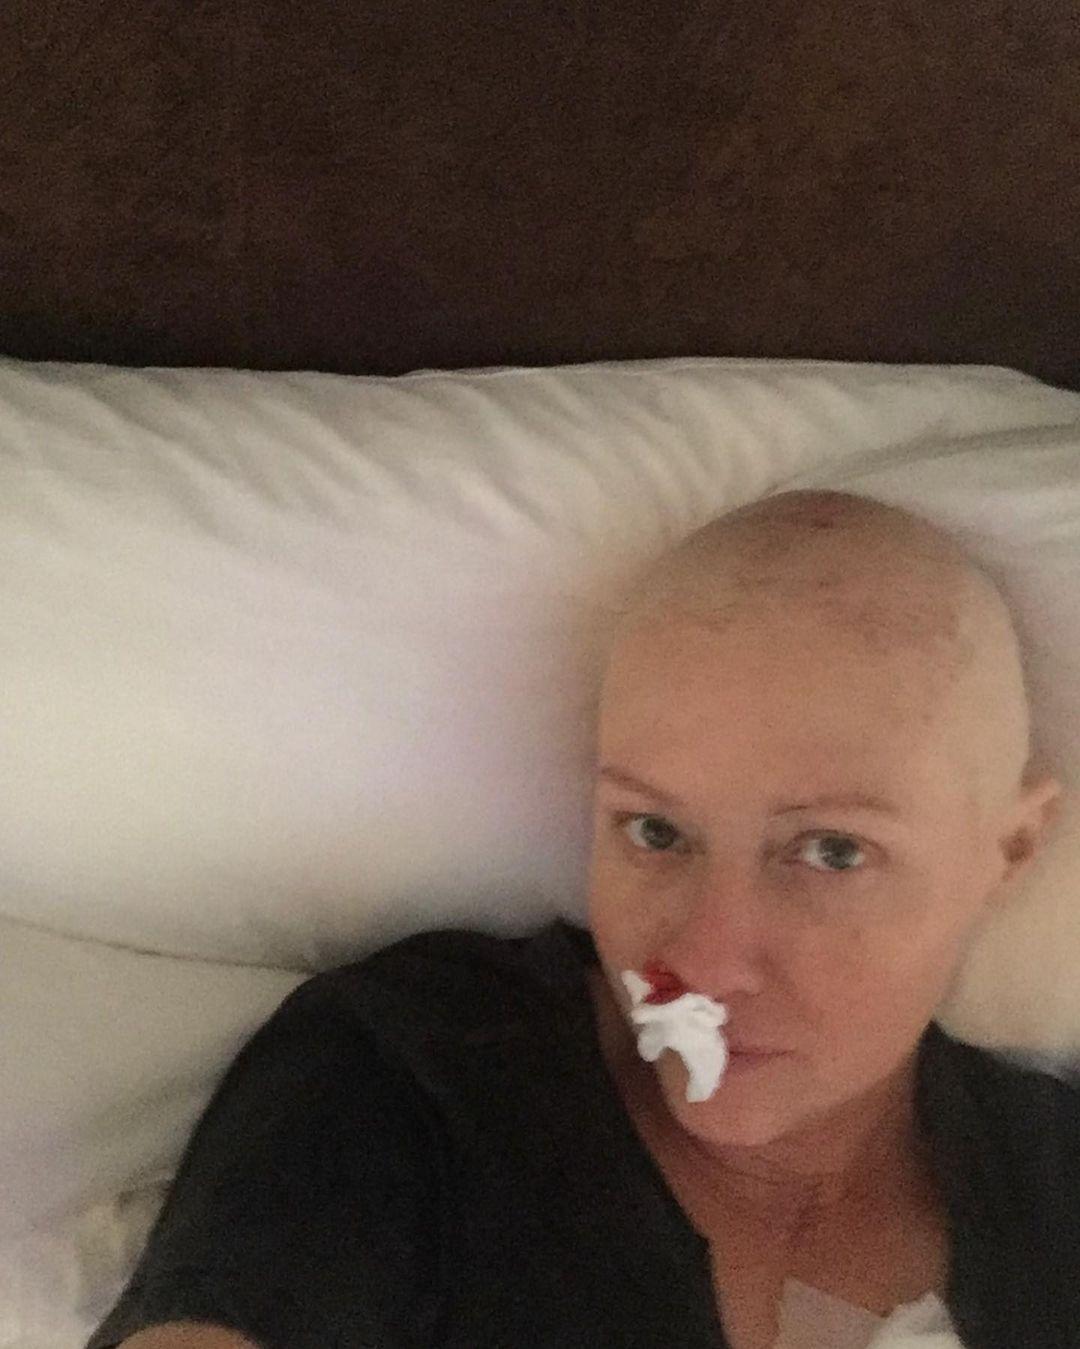 ‘90210’ Star Shannen Doherty Shares Heartbreaking Cancer Treatment Pictures